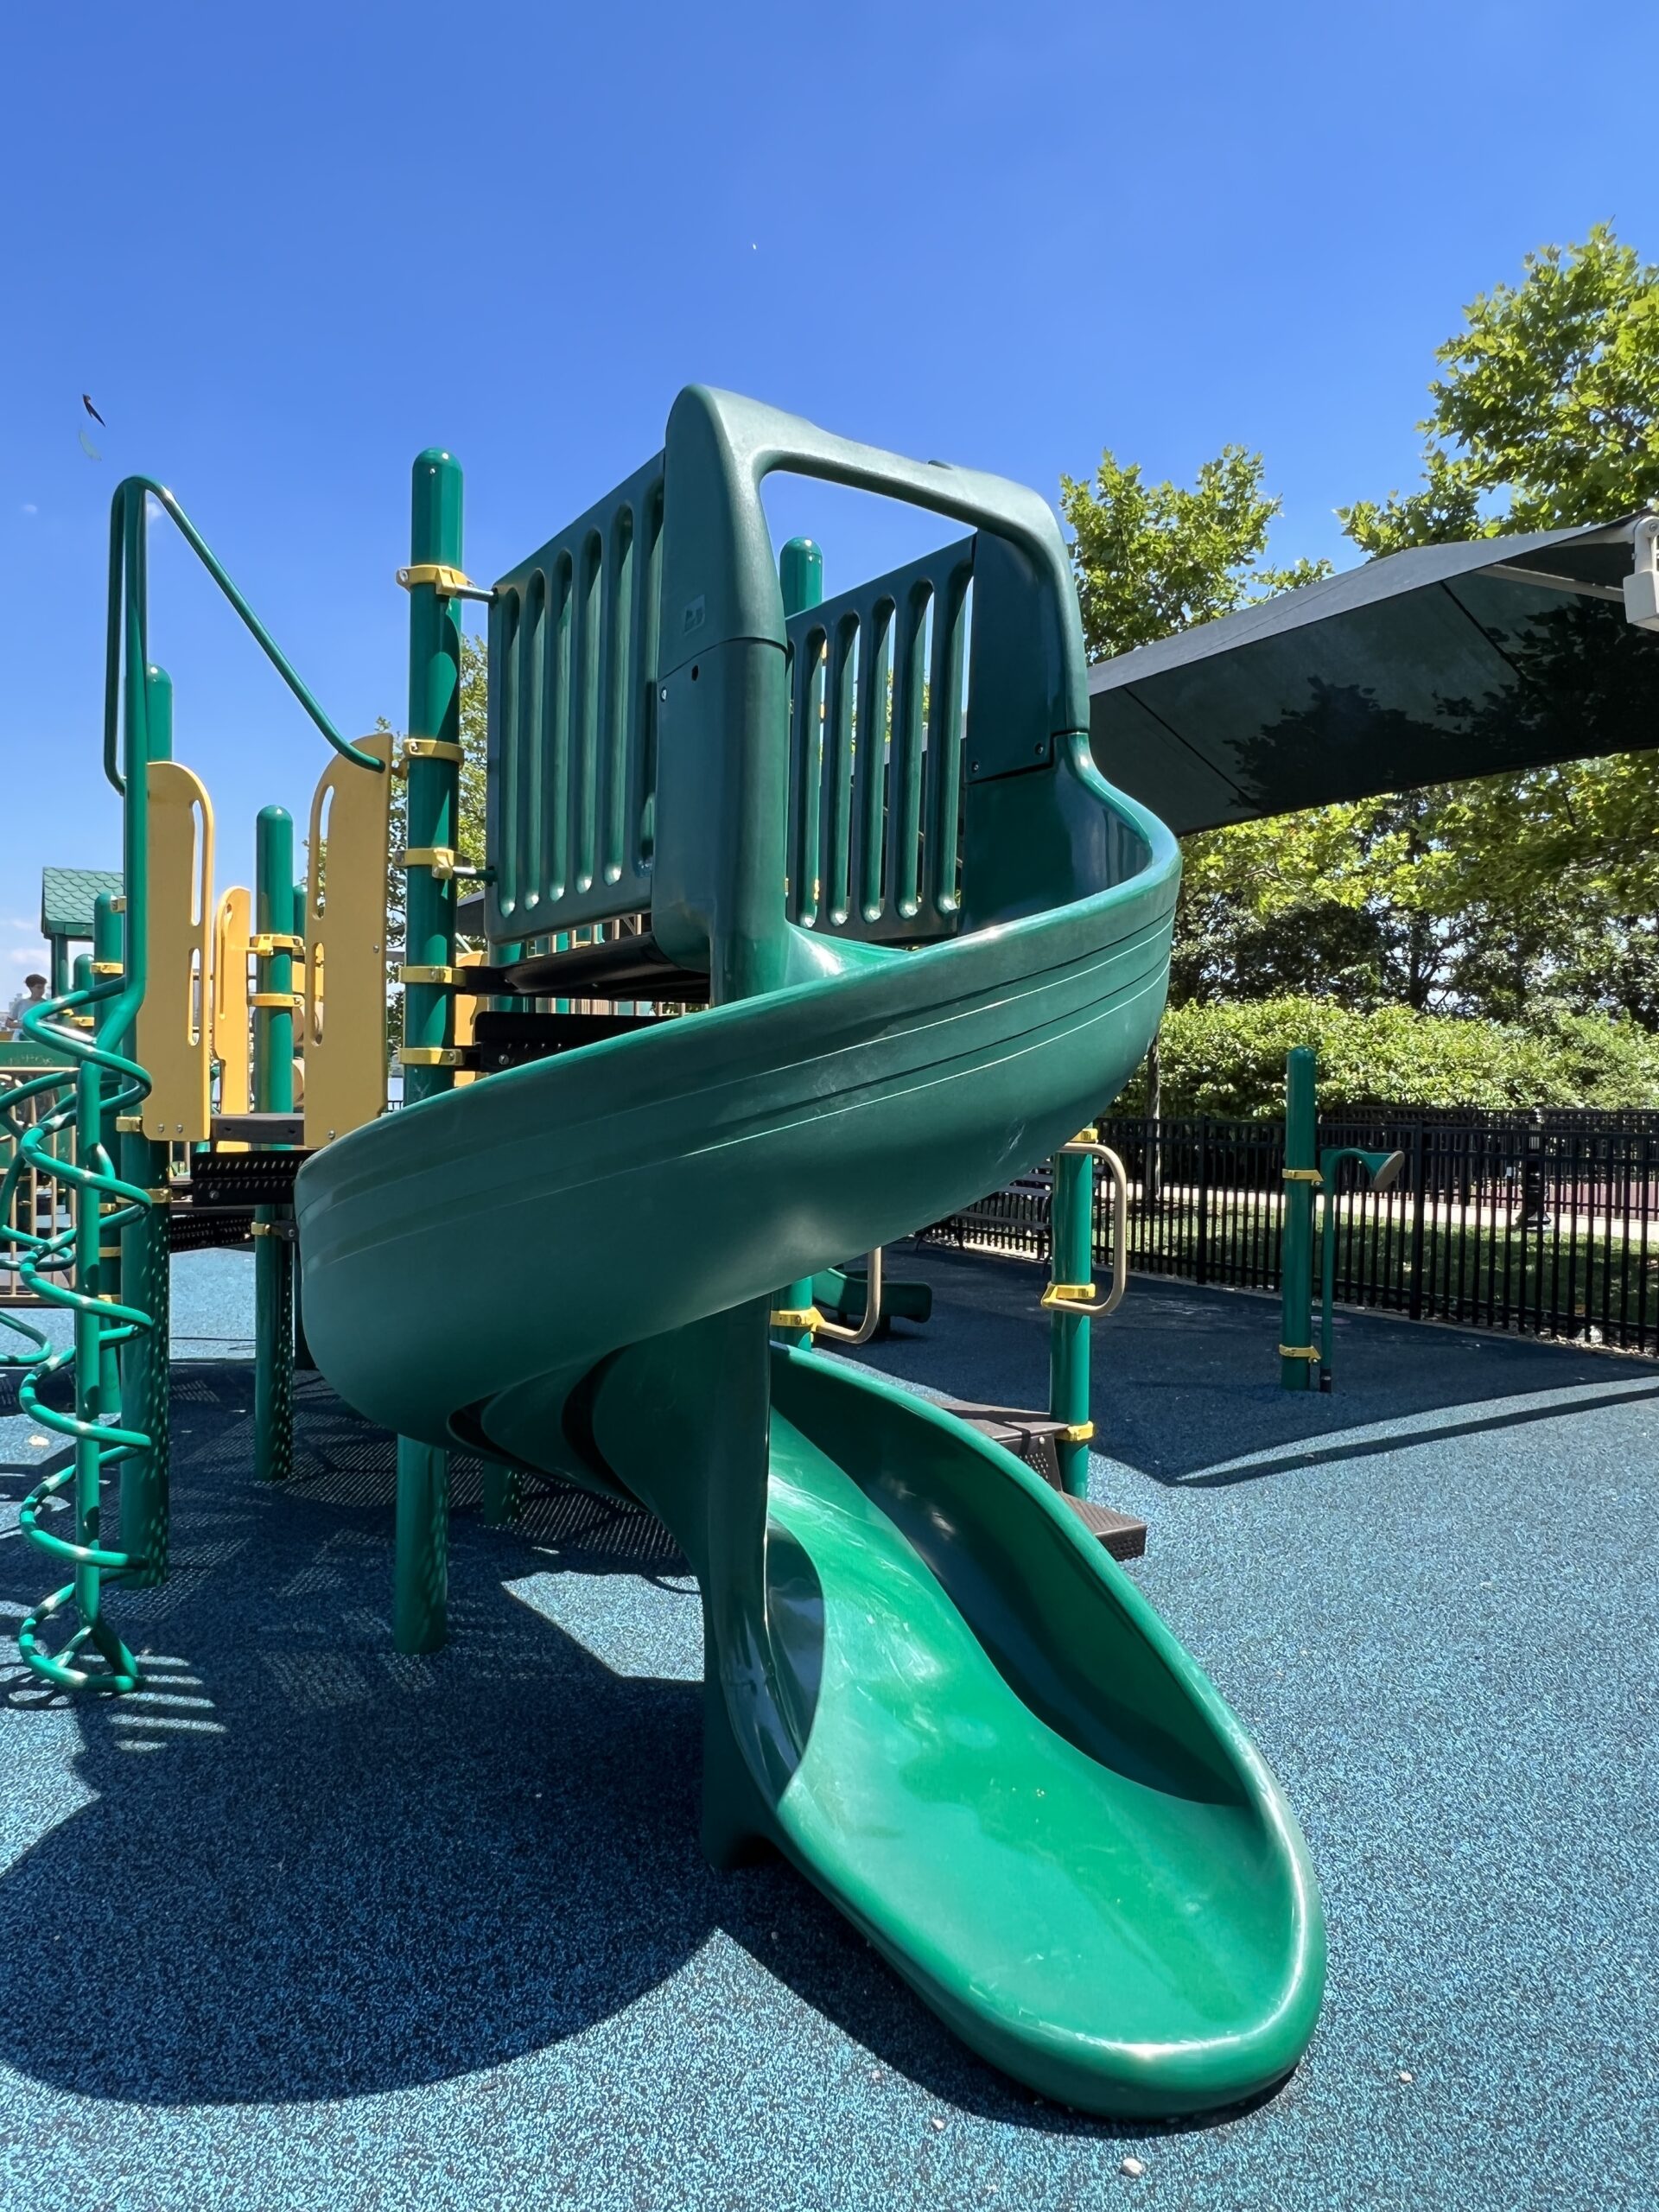 Maxwell Place Park Playground in Hoboken NJ - SLIDE - twisting slide TALL image